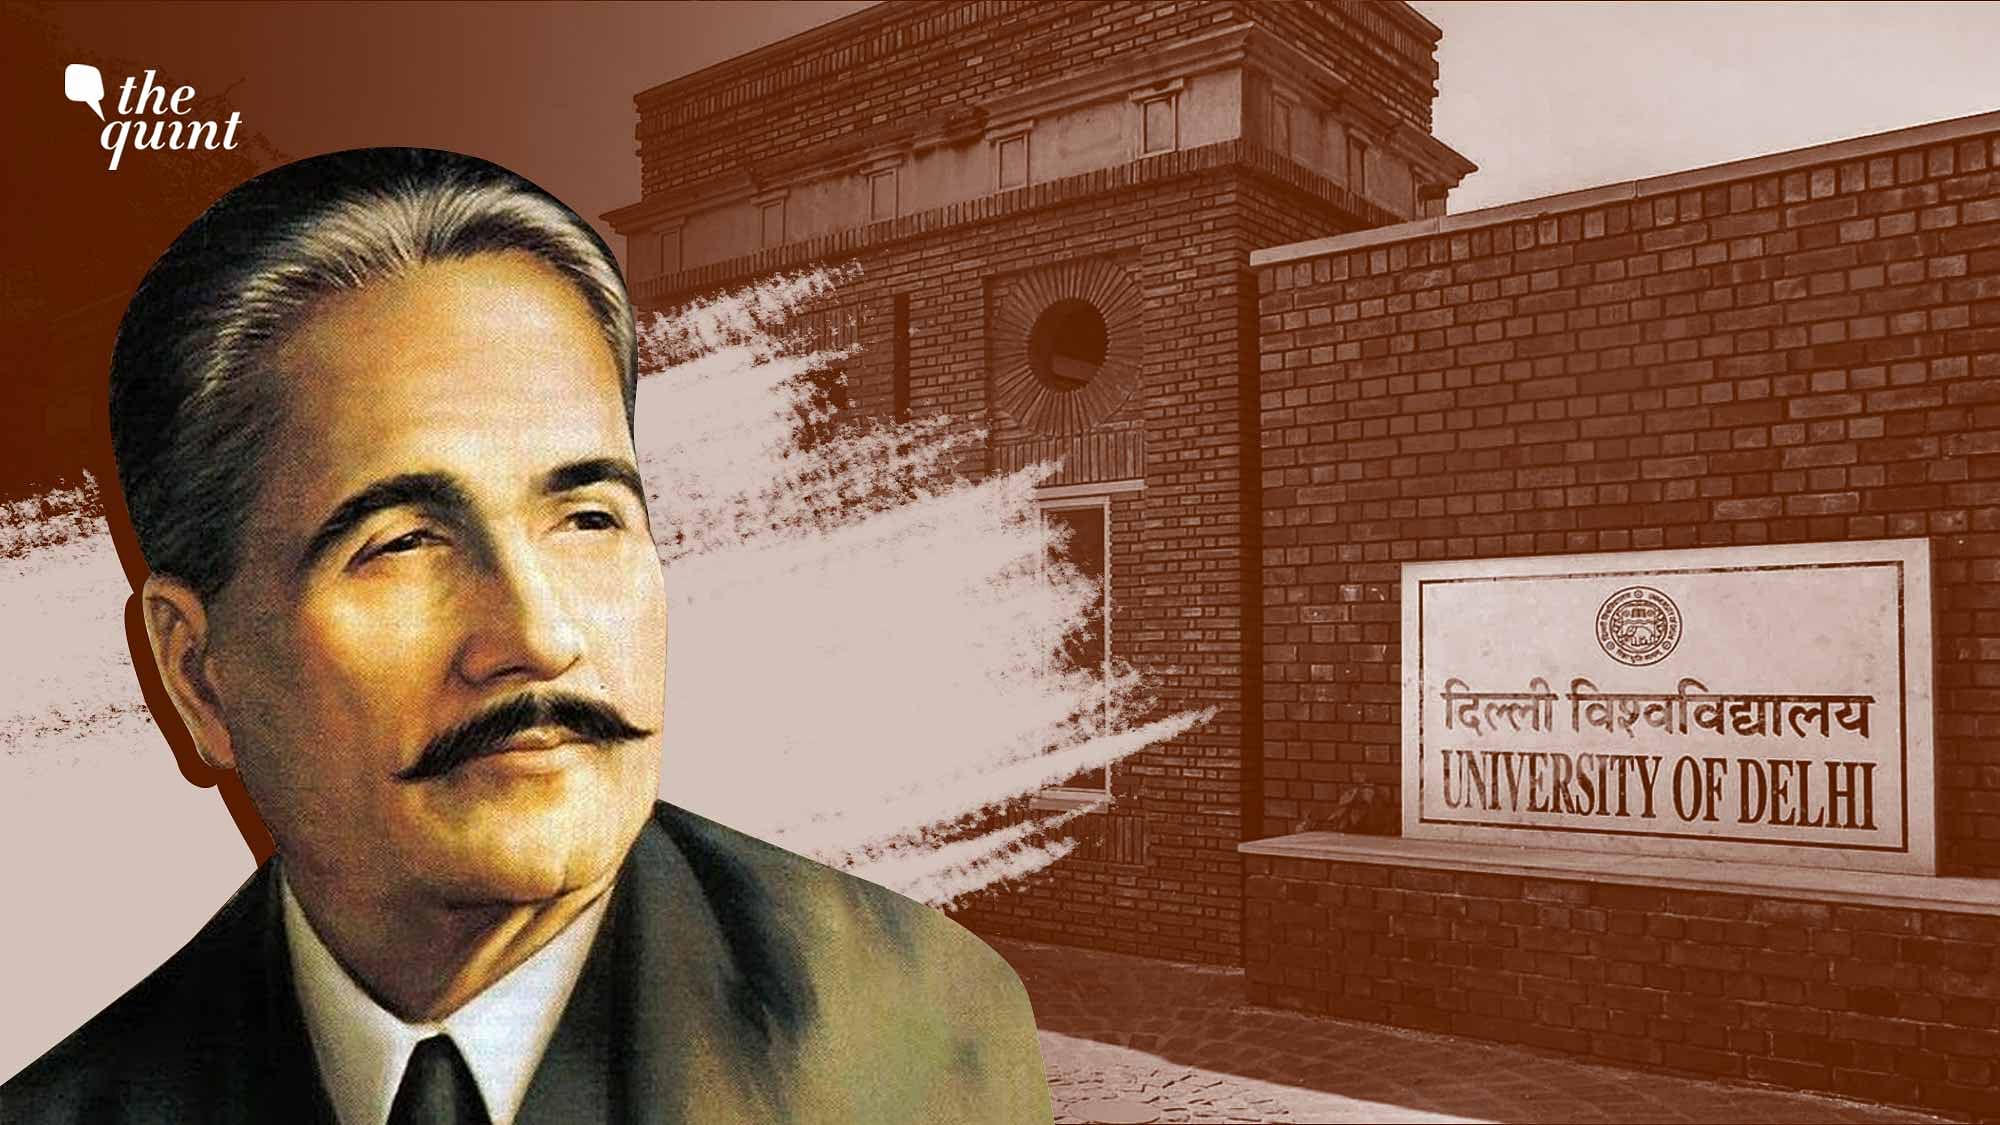 <div class="paragraphs"><p>On 26 May, Delhi University’s Academic Council unanimously removed a sub-unit on Urdu poet, thinker, and author&nbsp;Muhammad Iqbal from the Political Science syllabus, despite opposition from the academic community.&nbsp;&nbsp;</p></div>